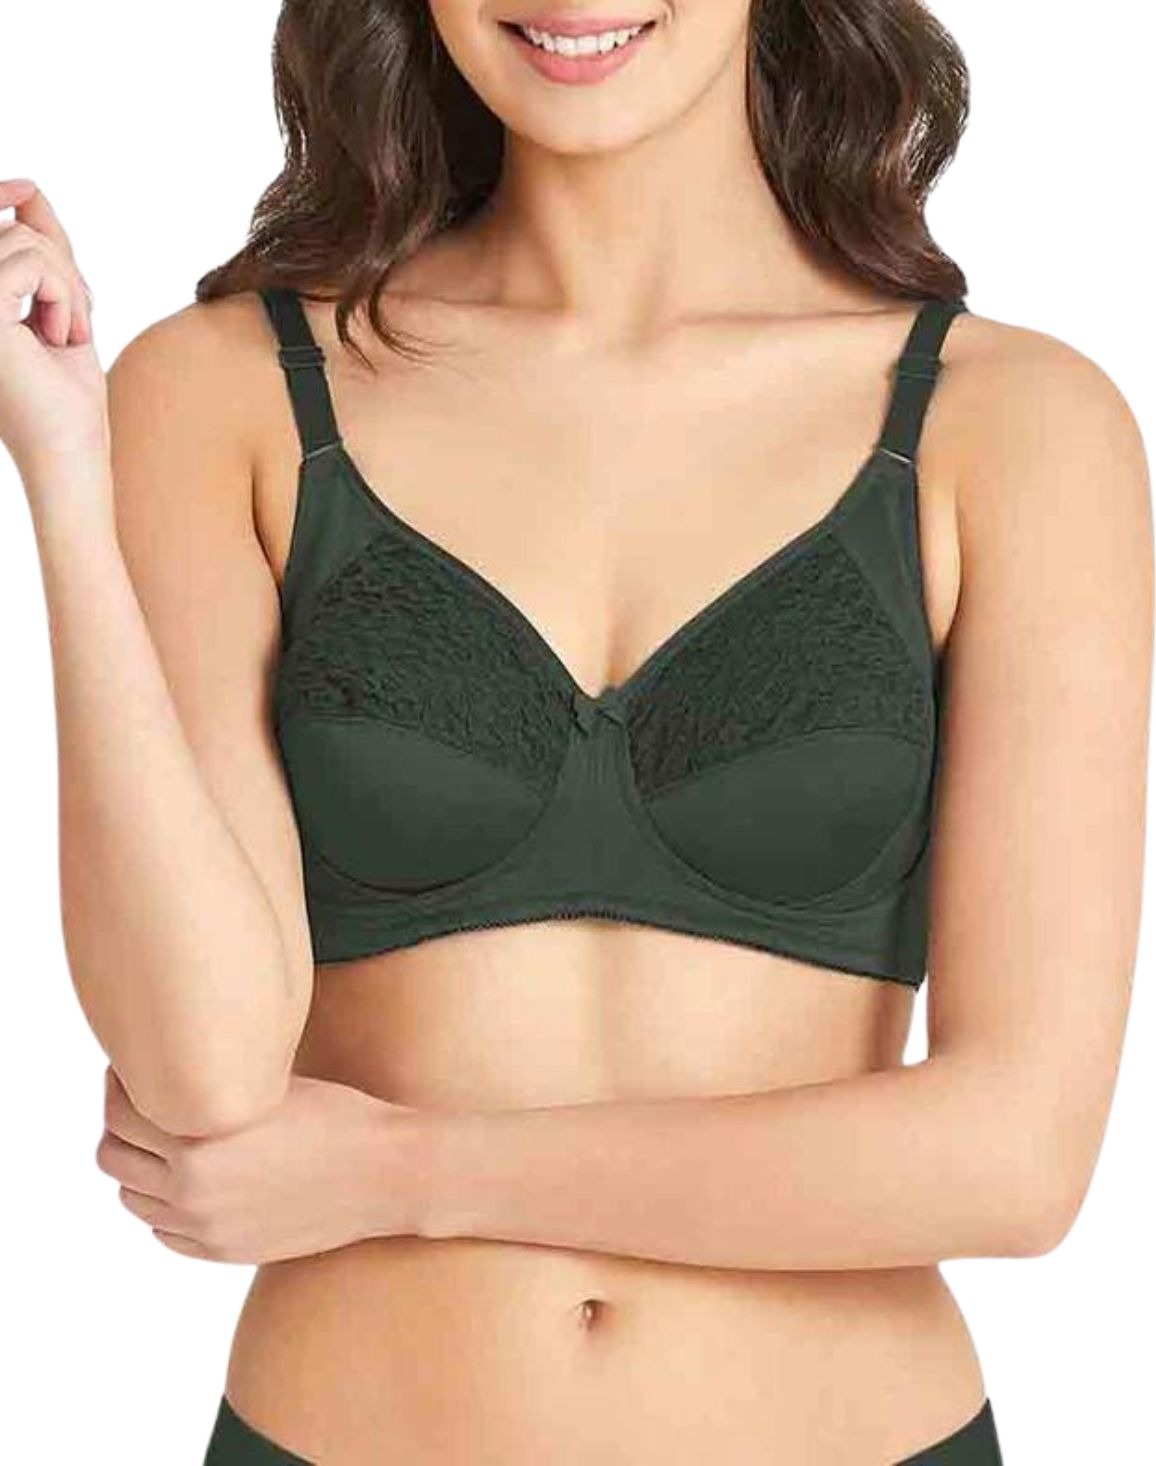 NOLIMIT SRI LANKA - Grab it while it's here ladies! 👩‍🦰🧕👩👱‍♀️ Flat 20%  off on all Amante Saree shaper bras. Kindly note that the promo cannot be  combined with any ongoing offer